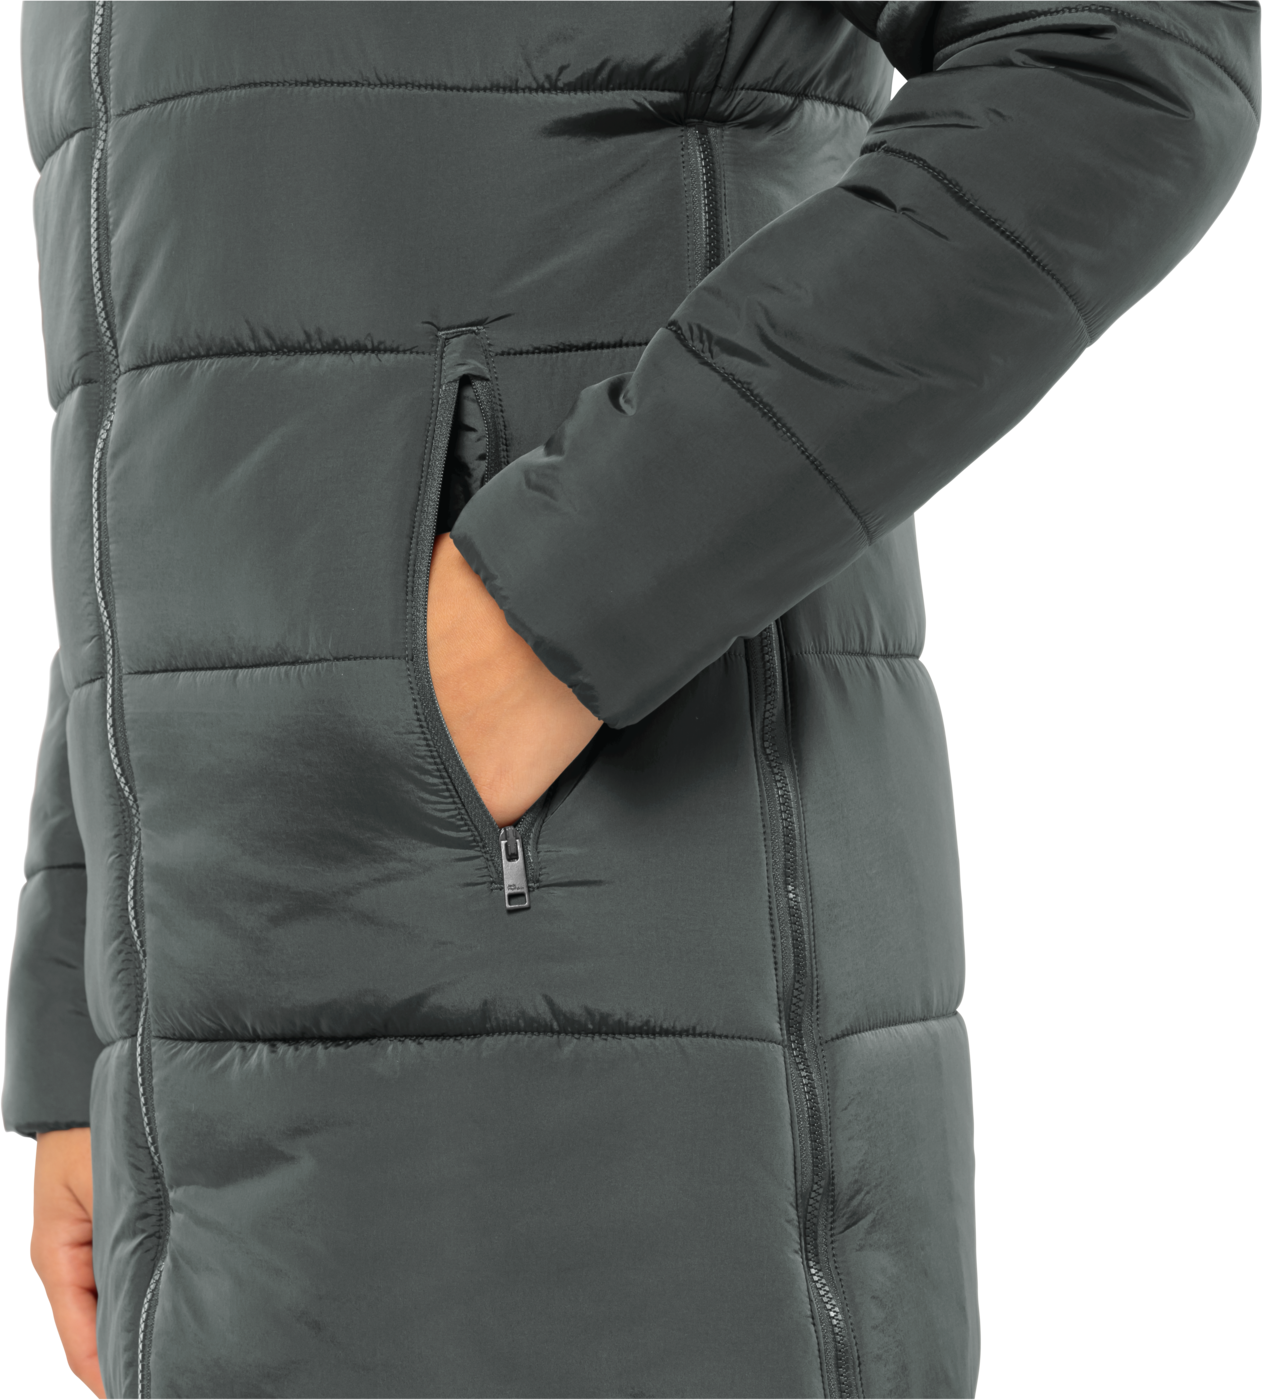 Eisbach Women\'s Coffee Cold Eisbach Coat Buy Coat | Coffee Women\'s | Outnorth here Cold